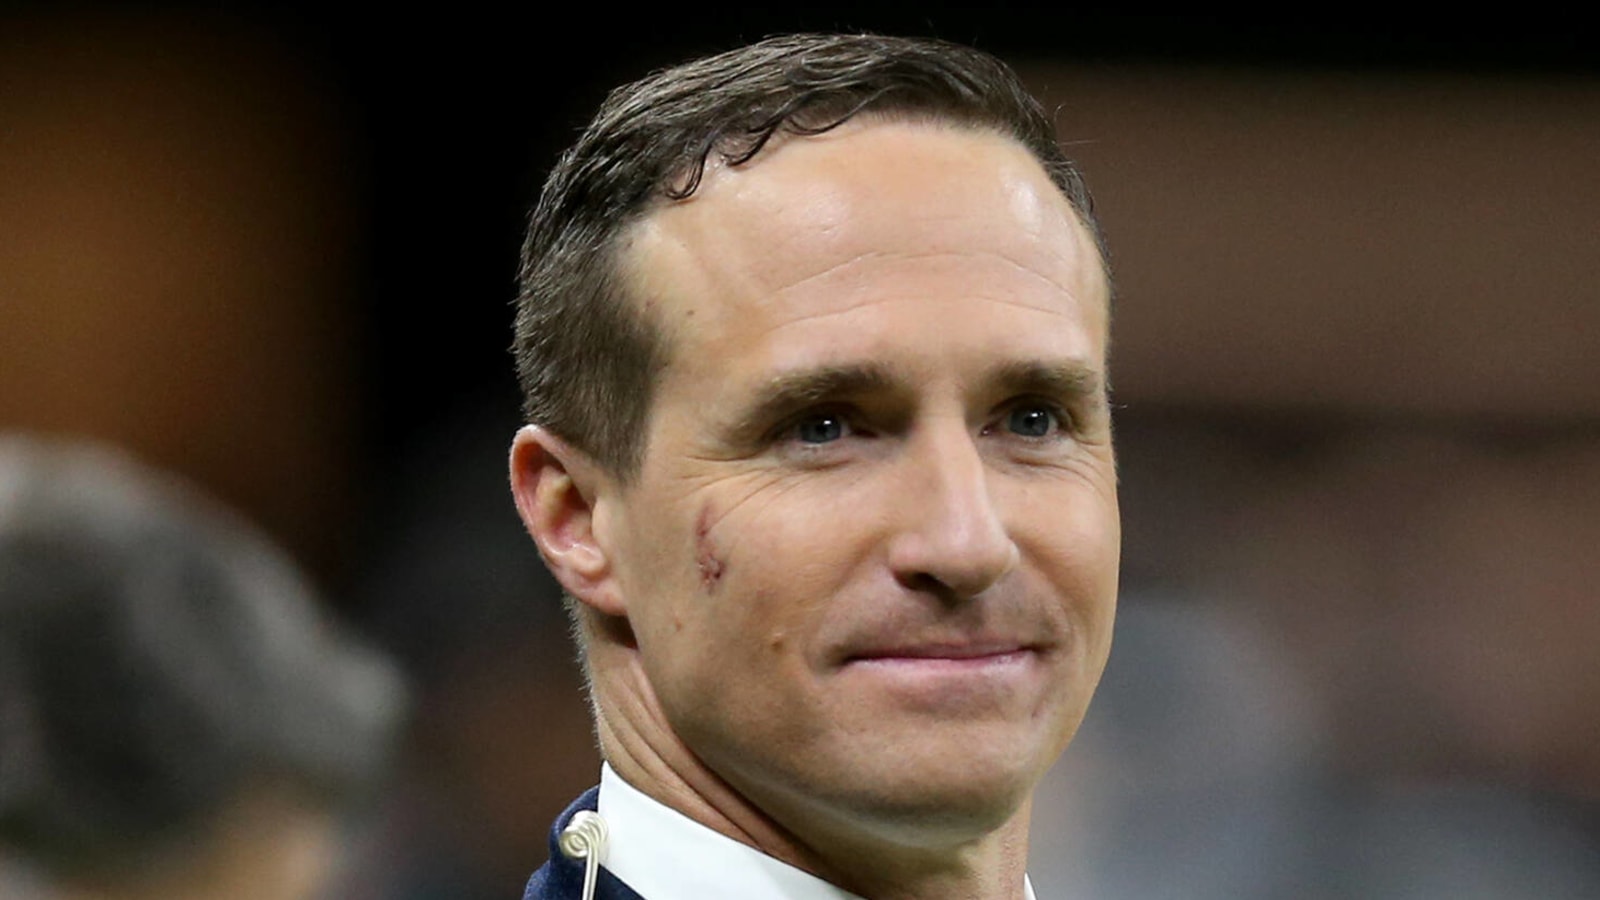 Drew Brees says he's undecided about future, speculates about NFL return